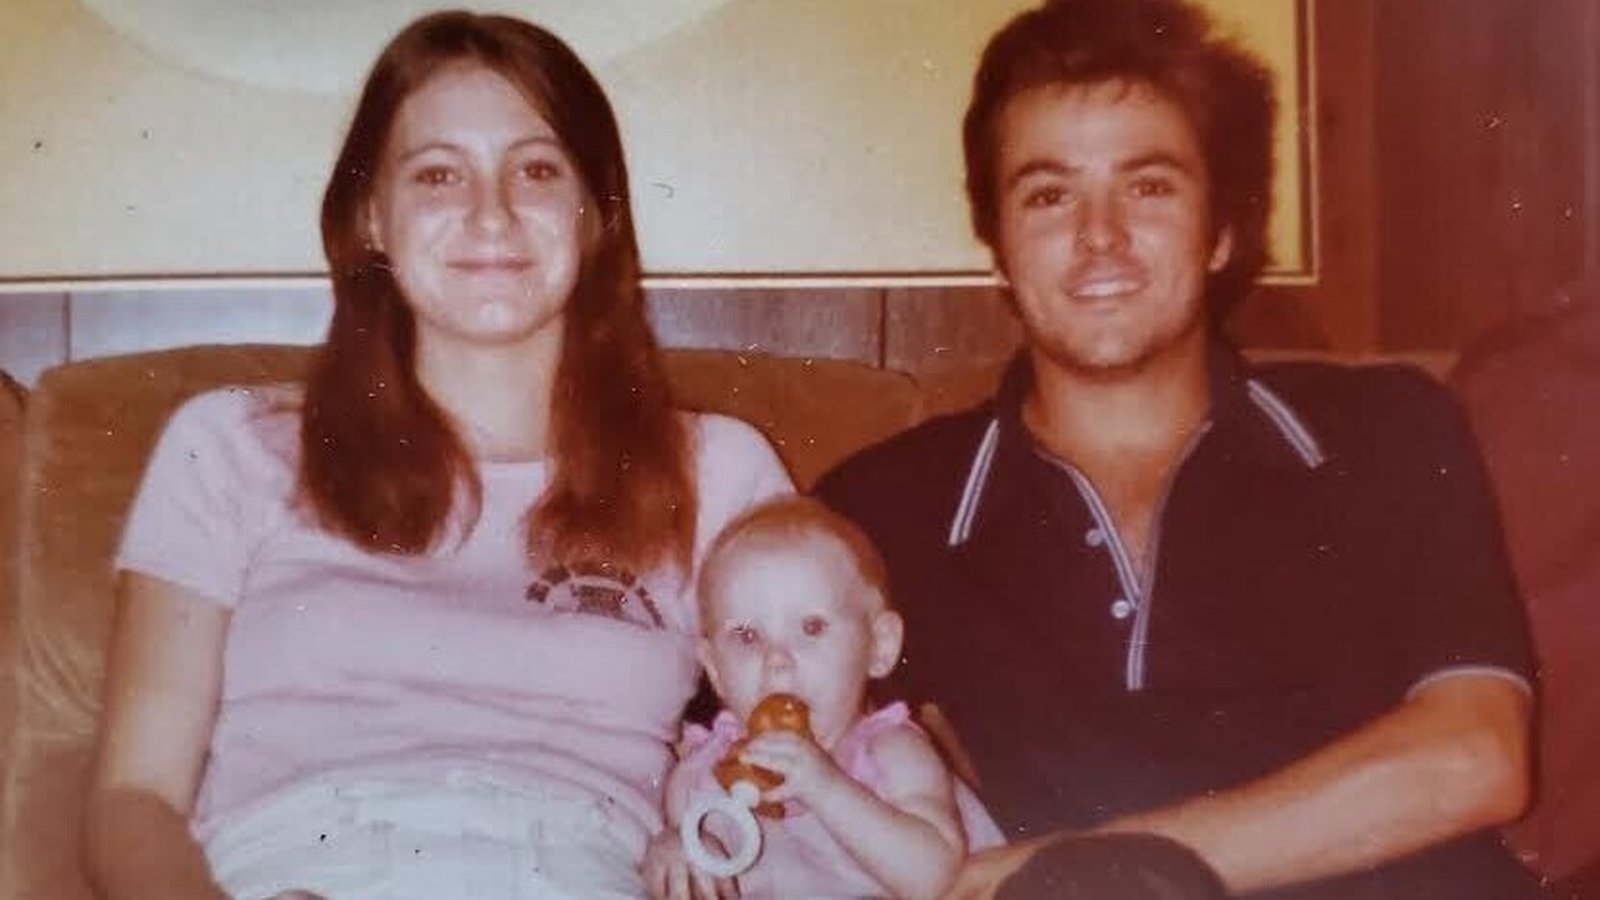 Missing US baby found 40 years after parents' murder